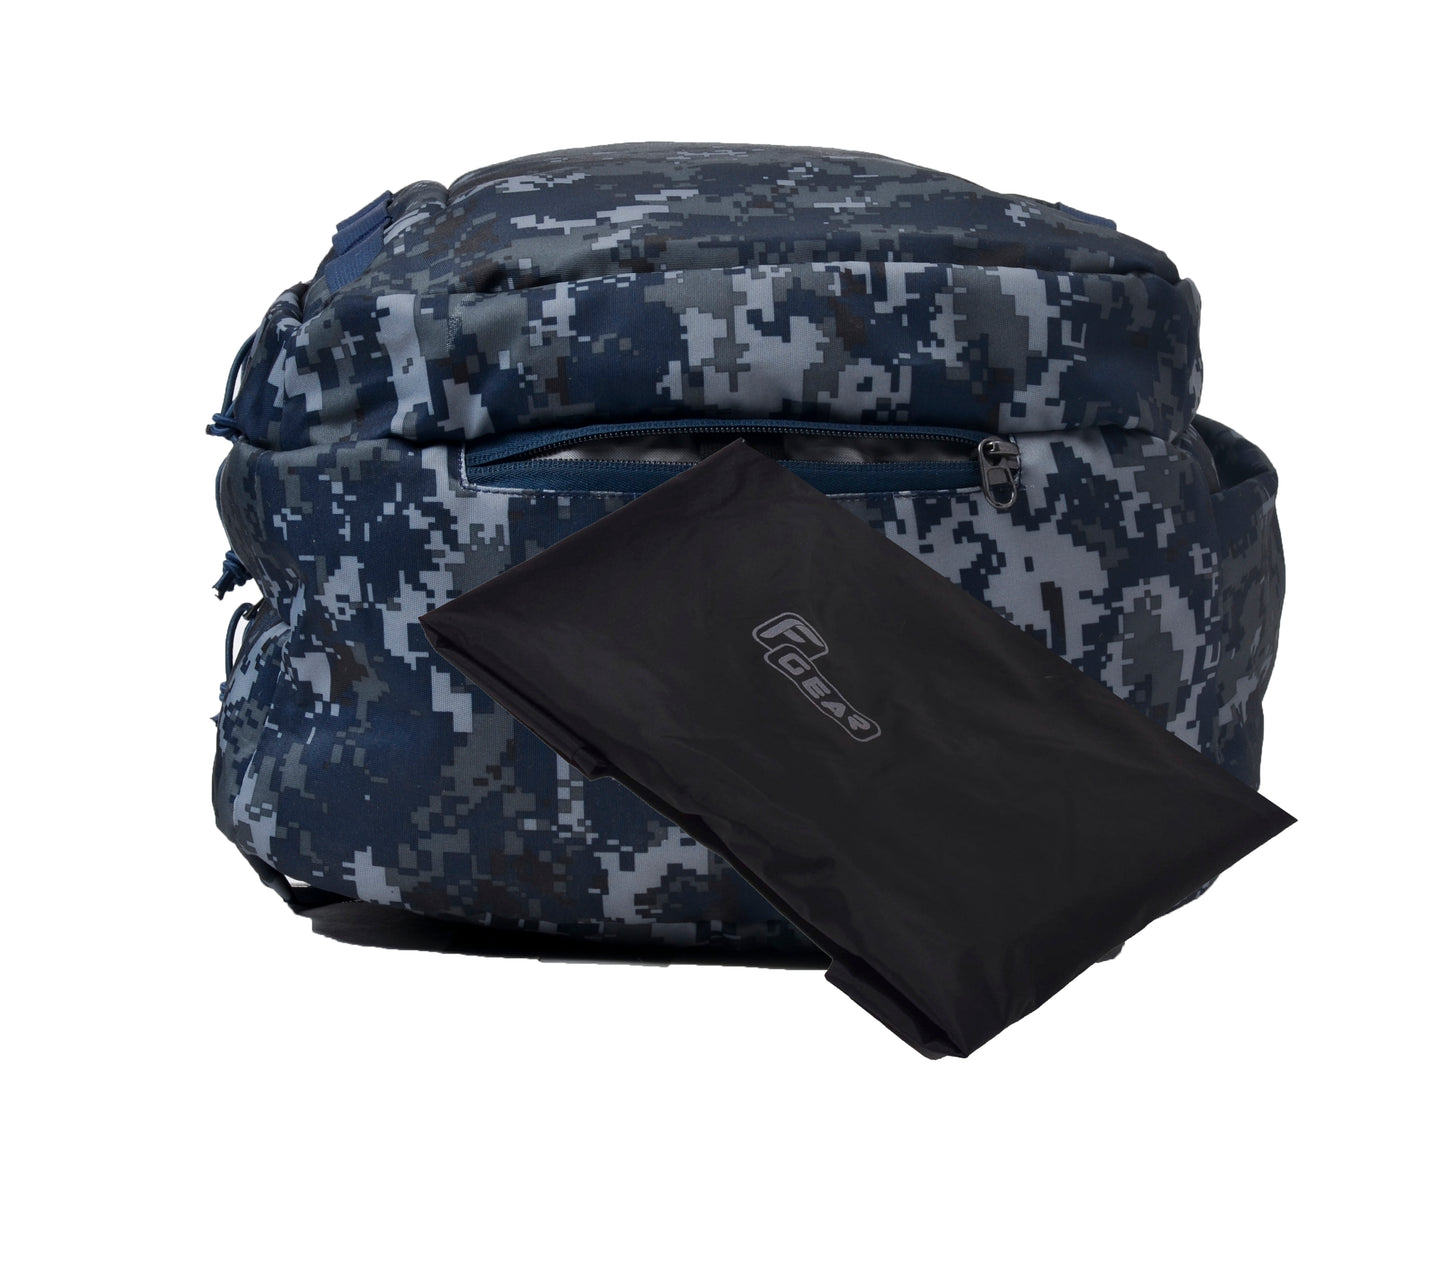 Military Raider 30L Marpat Navy Digital Camo Backpack with Rain Cover